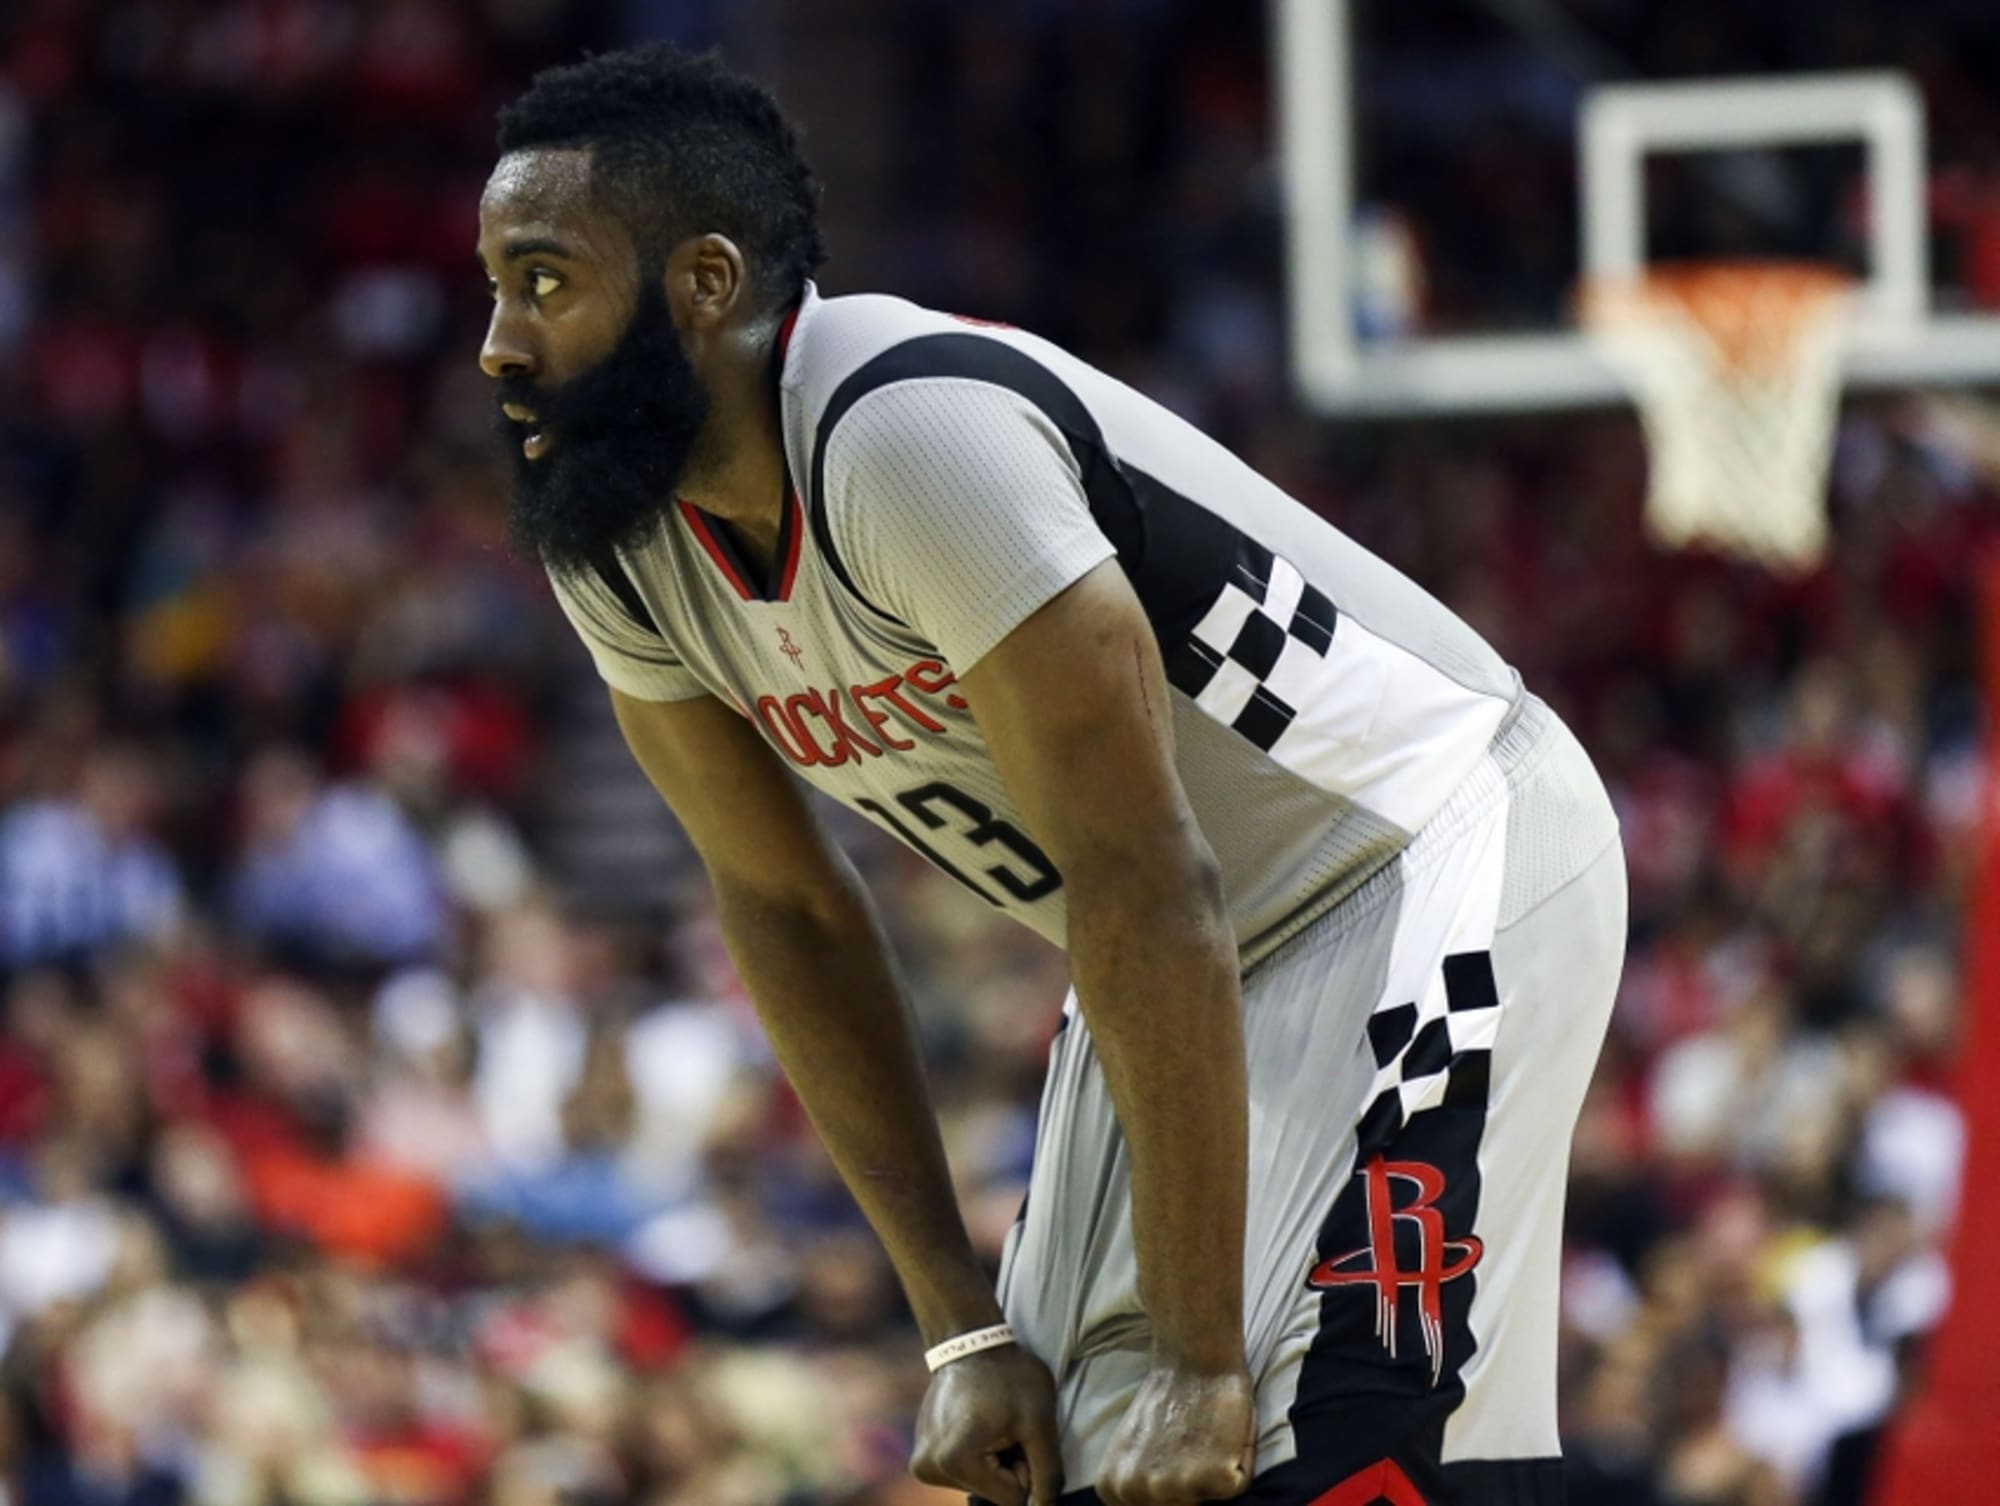 NBA on ESPN on X: James Harden and DeMarcus Cousins received